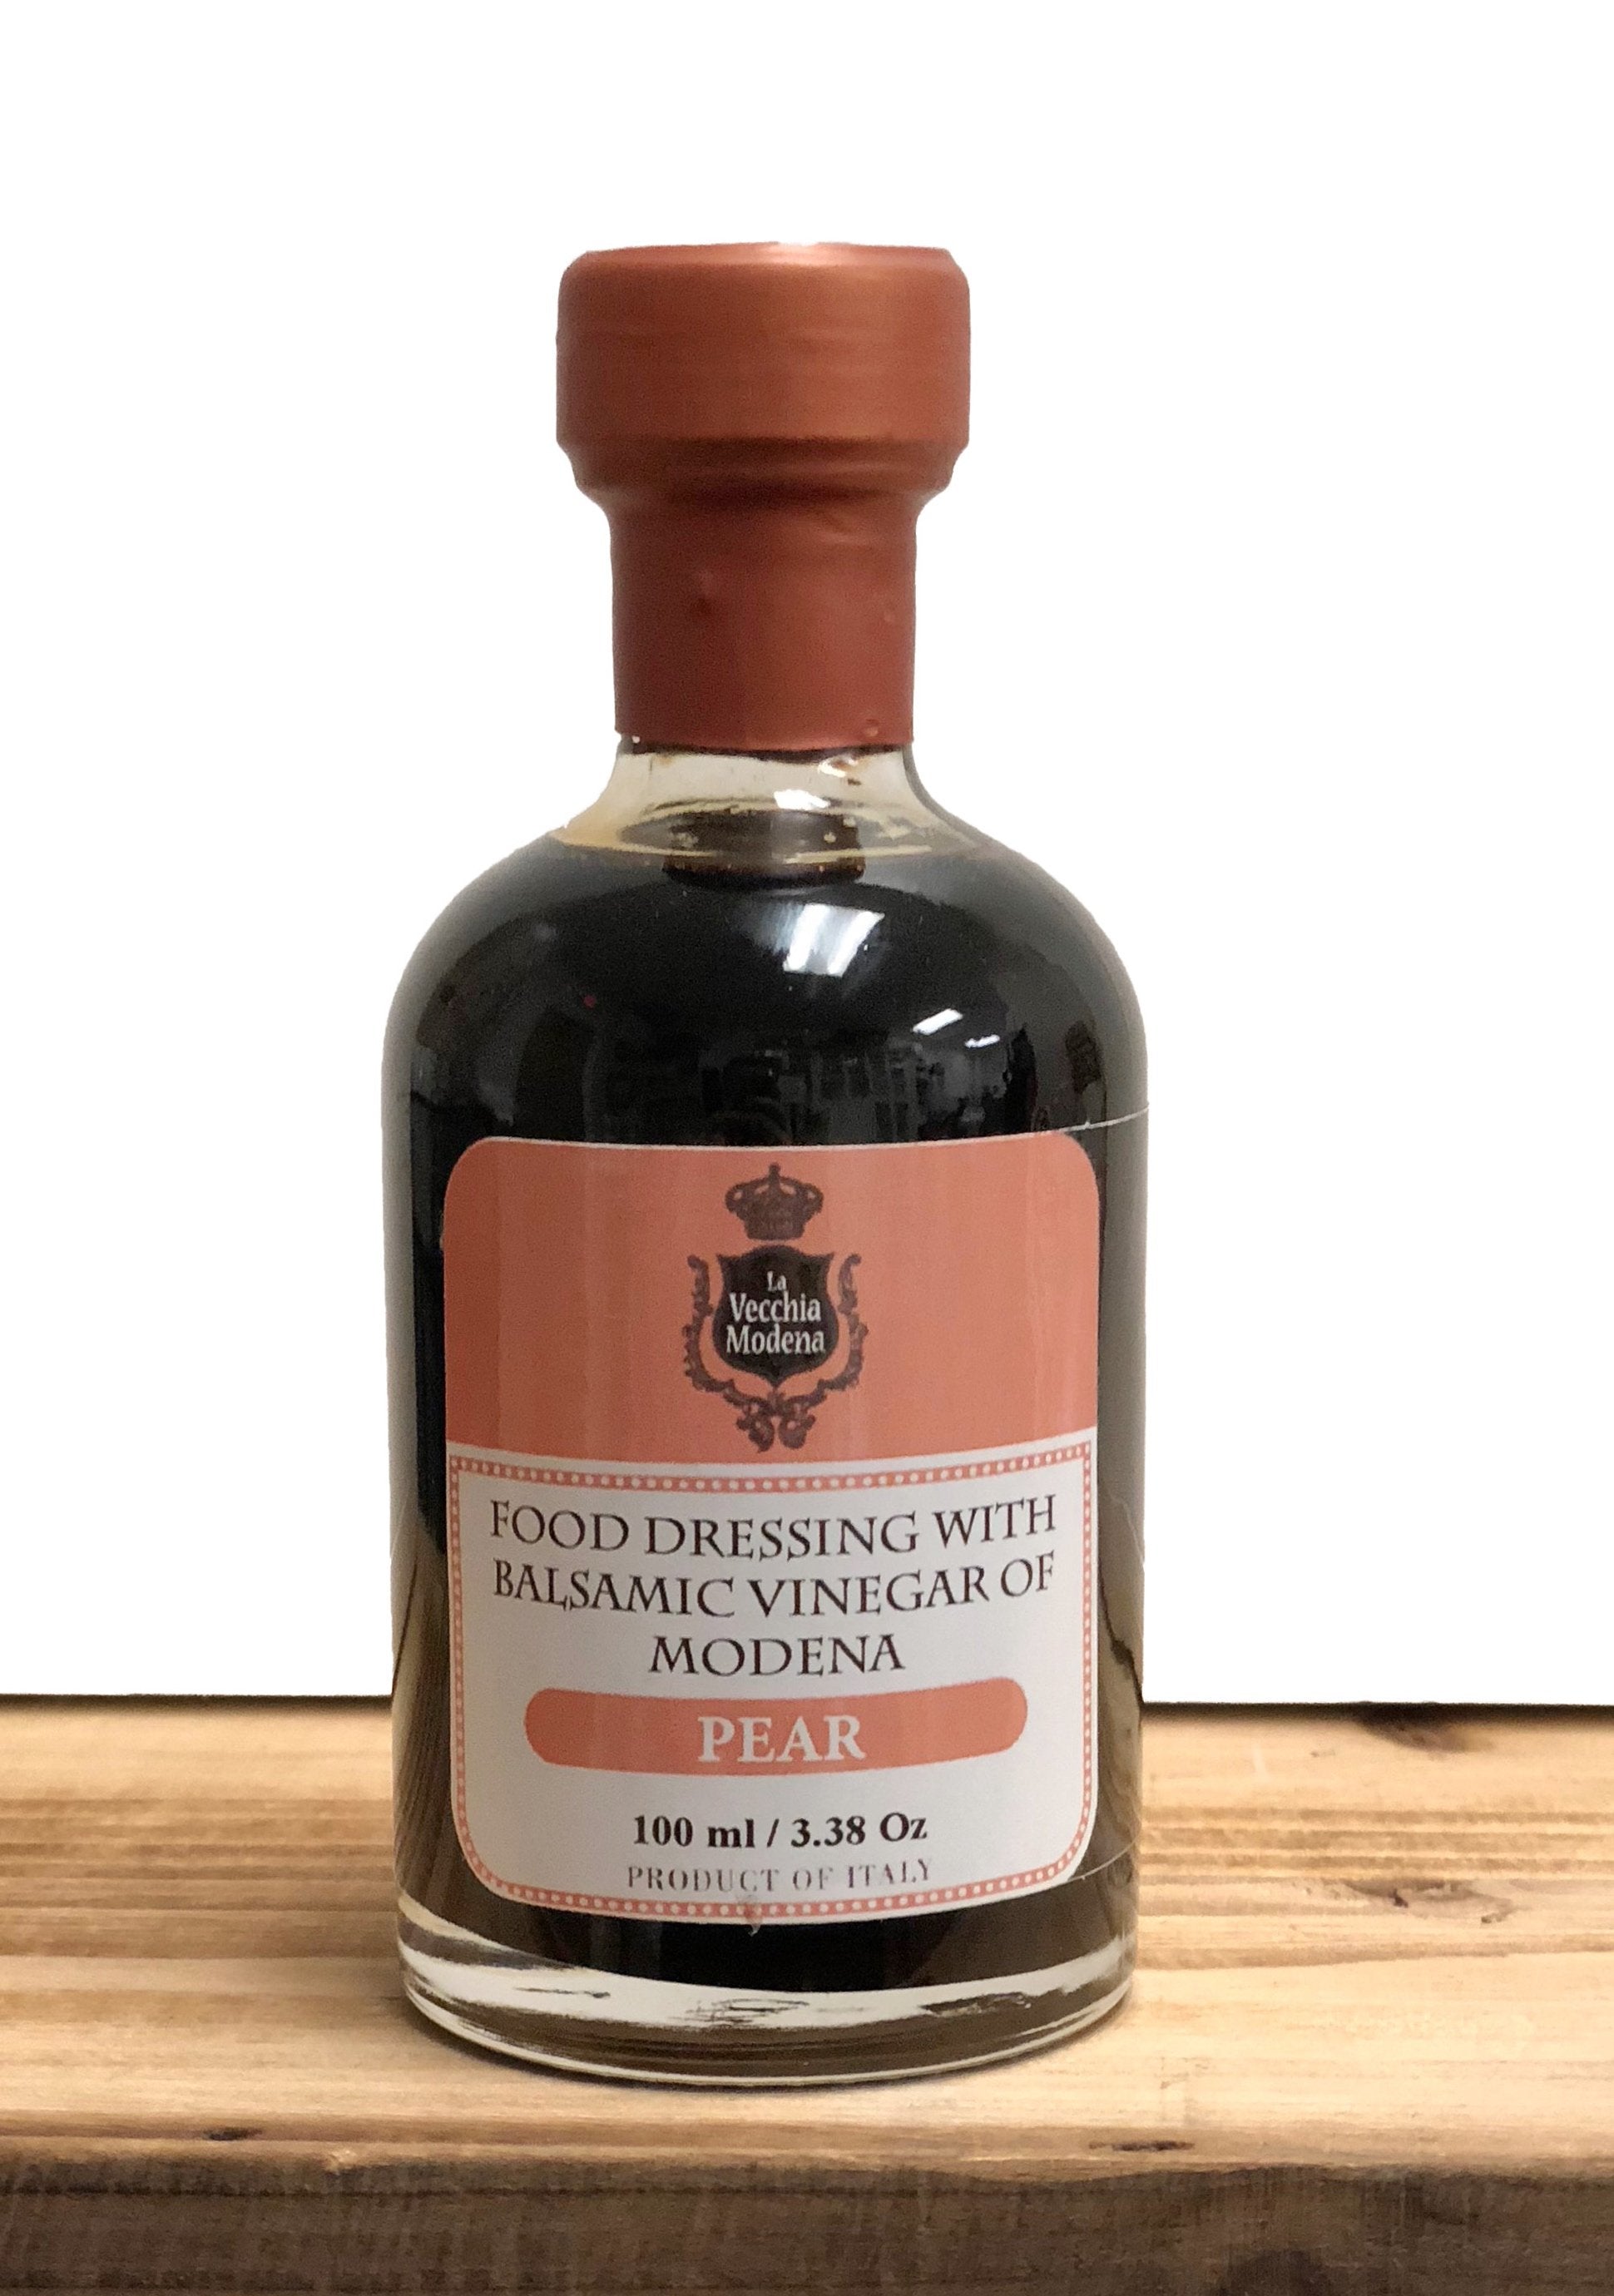 Balsamic Vinegar Of Modena with Pear